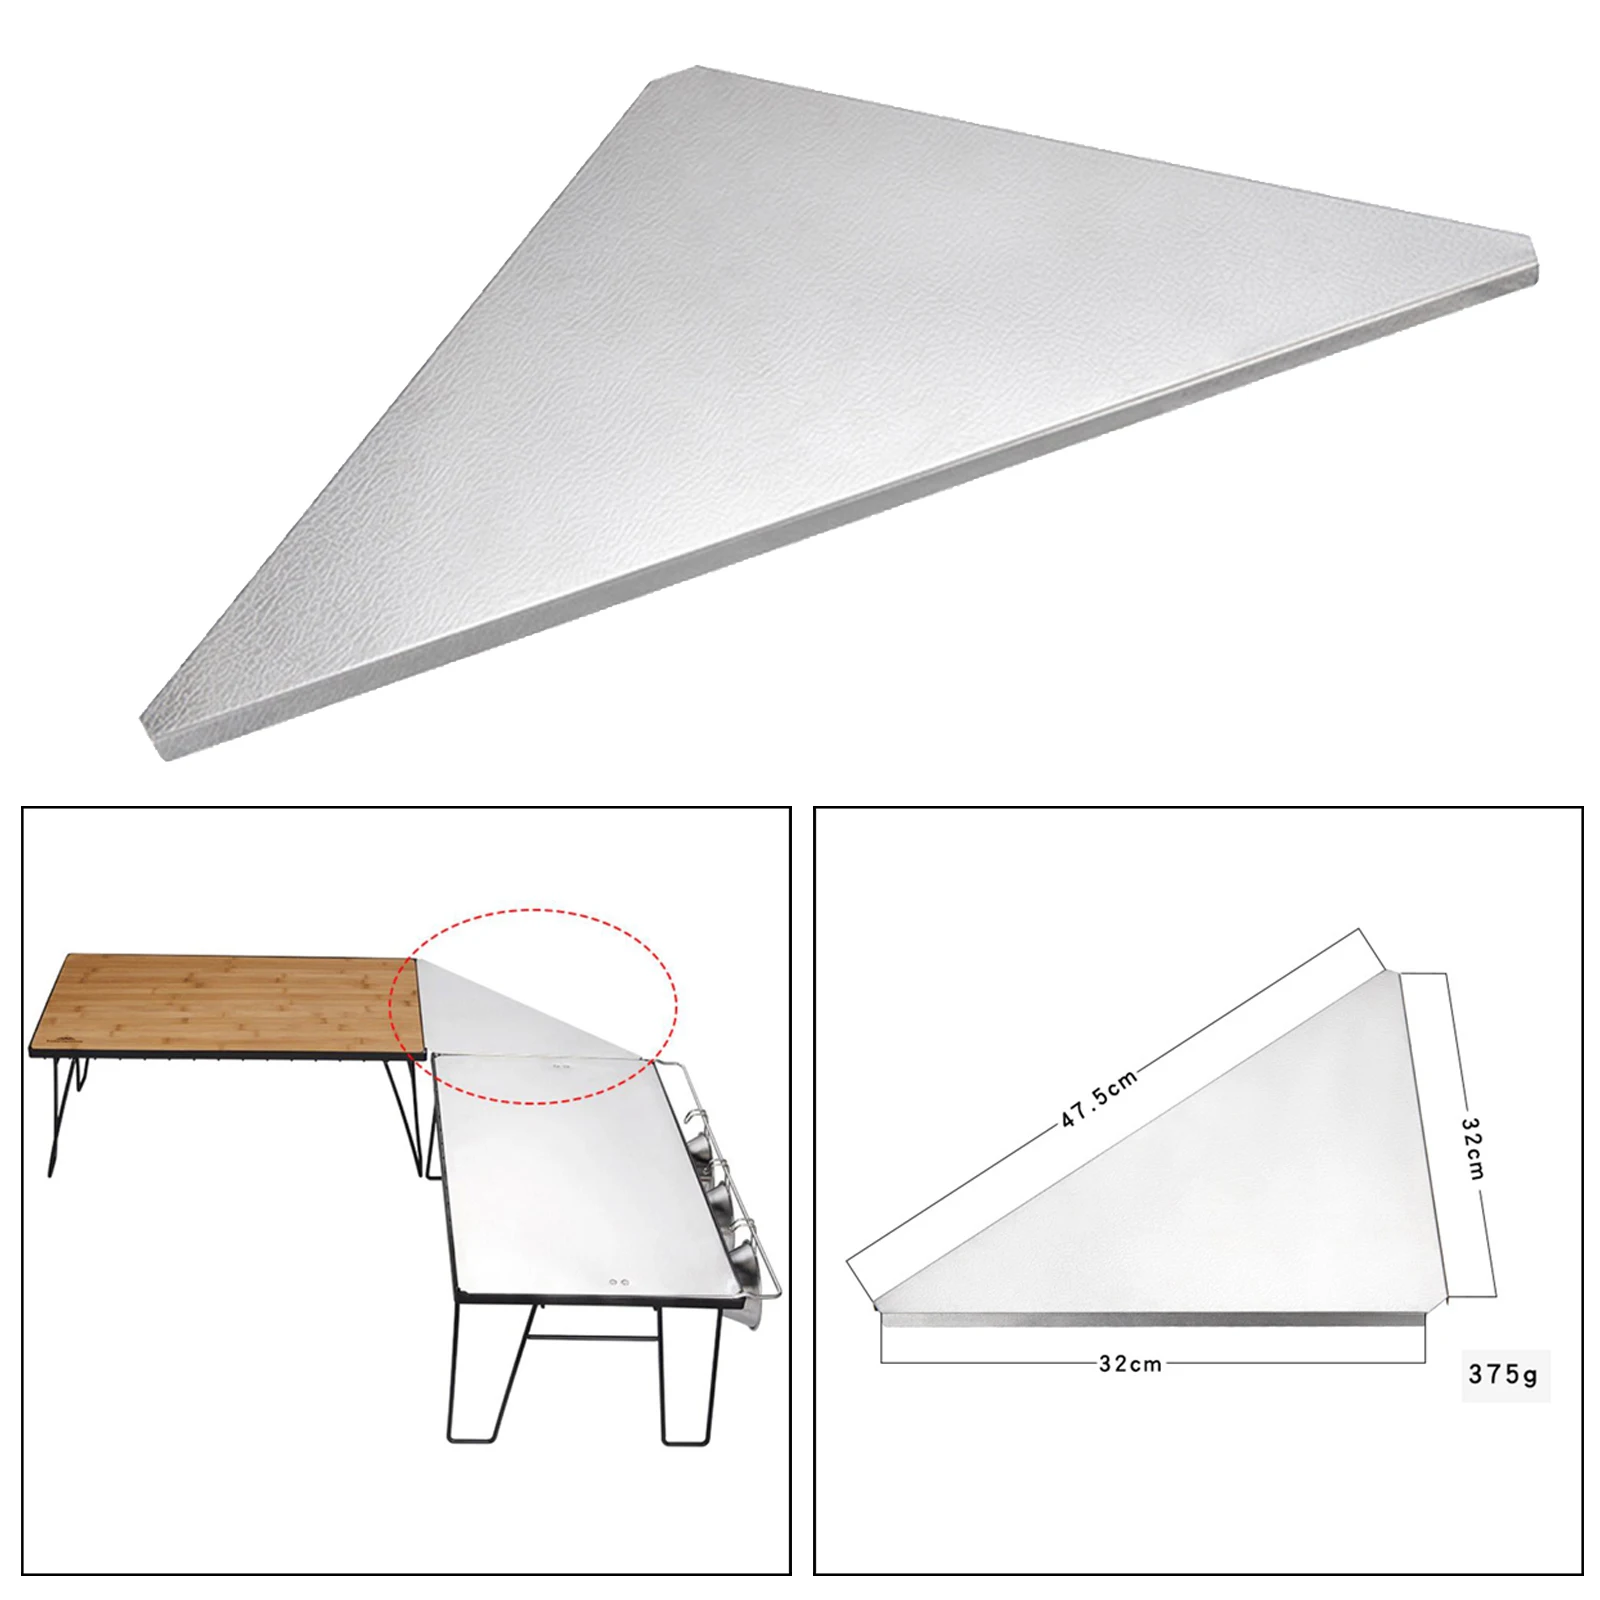 Stainless Steel Triangular Top Plate Multi-purpose Table Auxiliary Tray Desktop